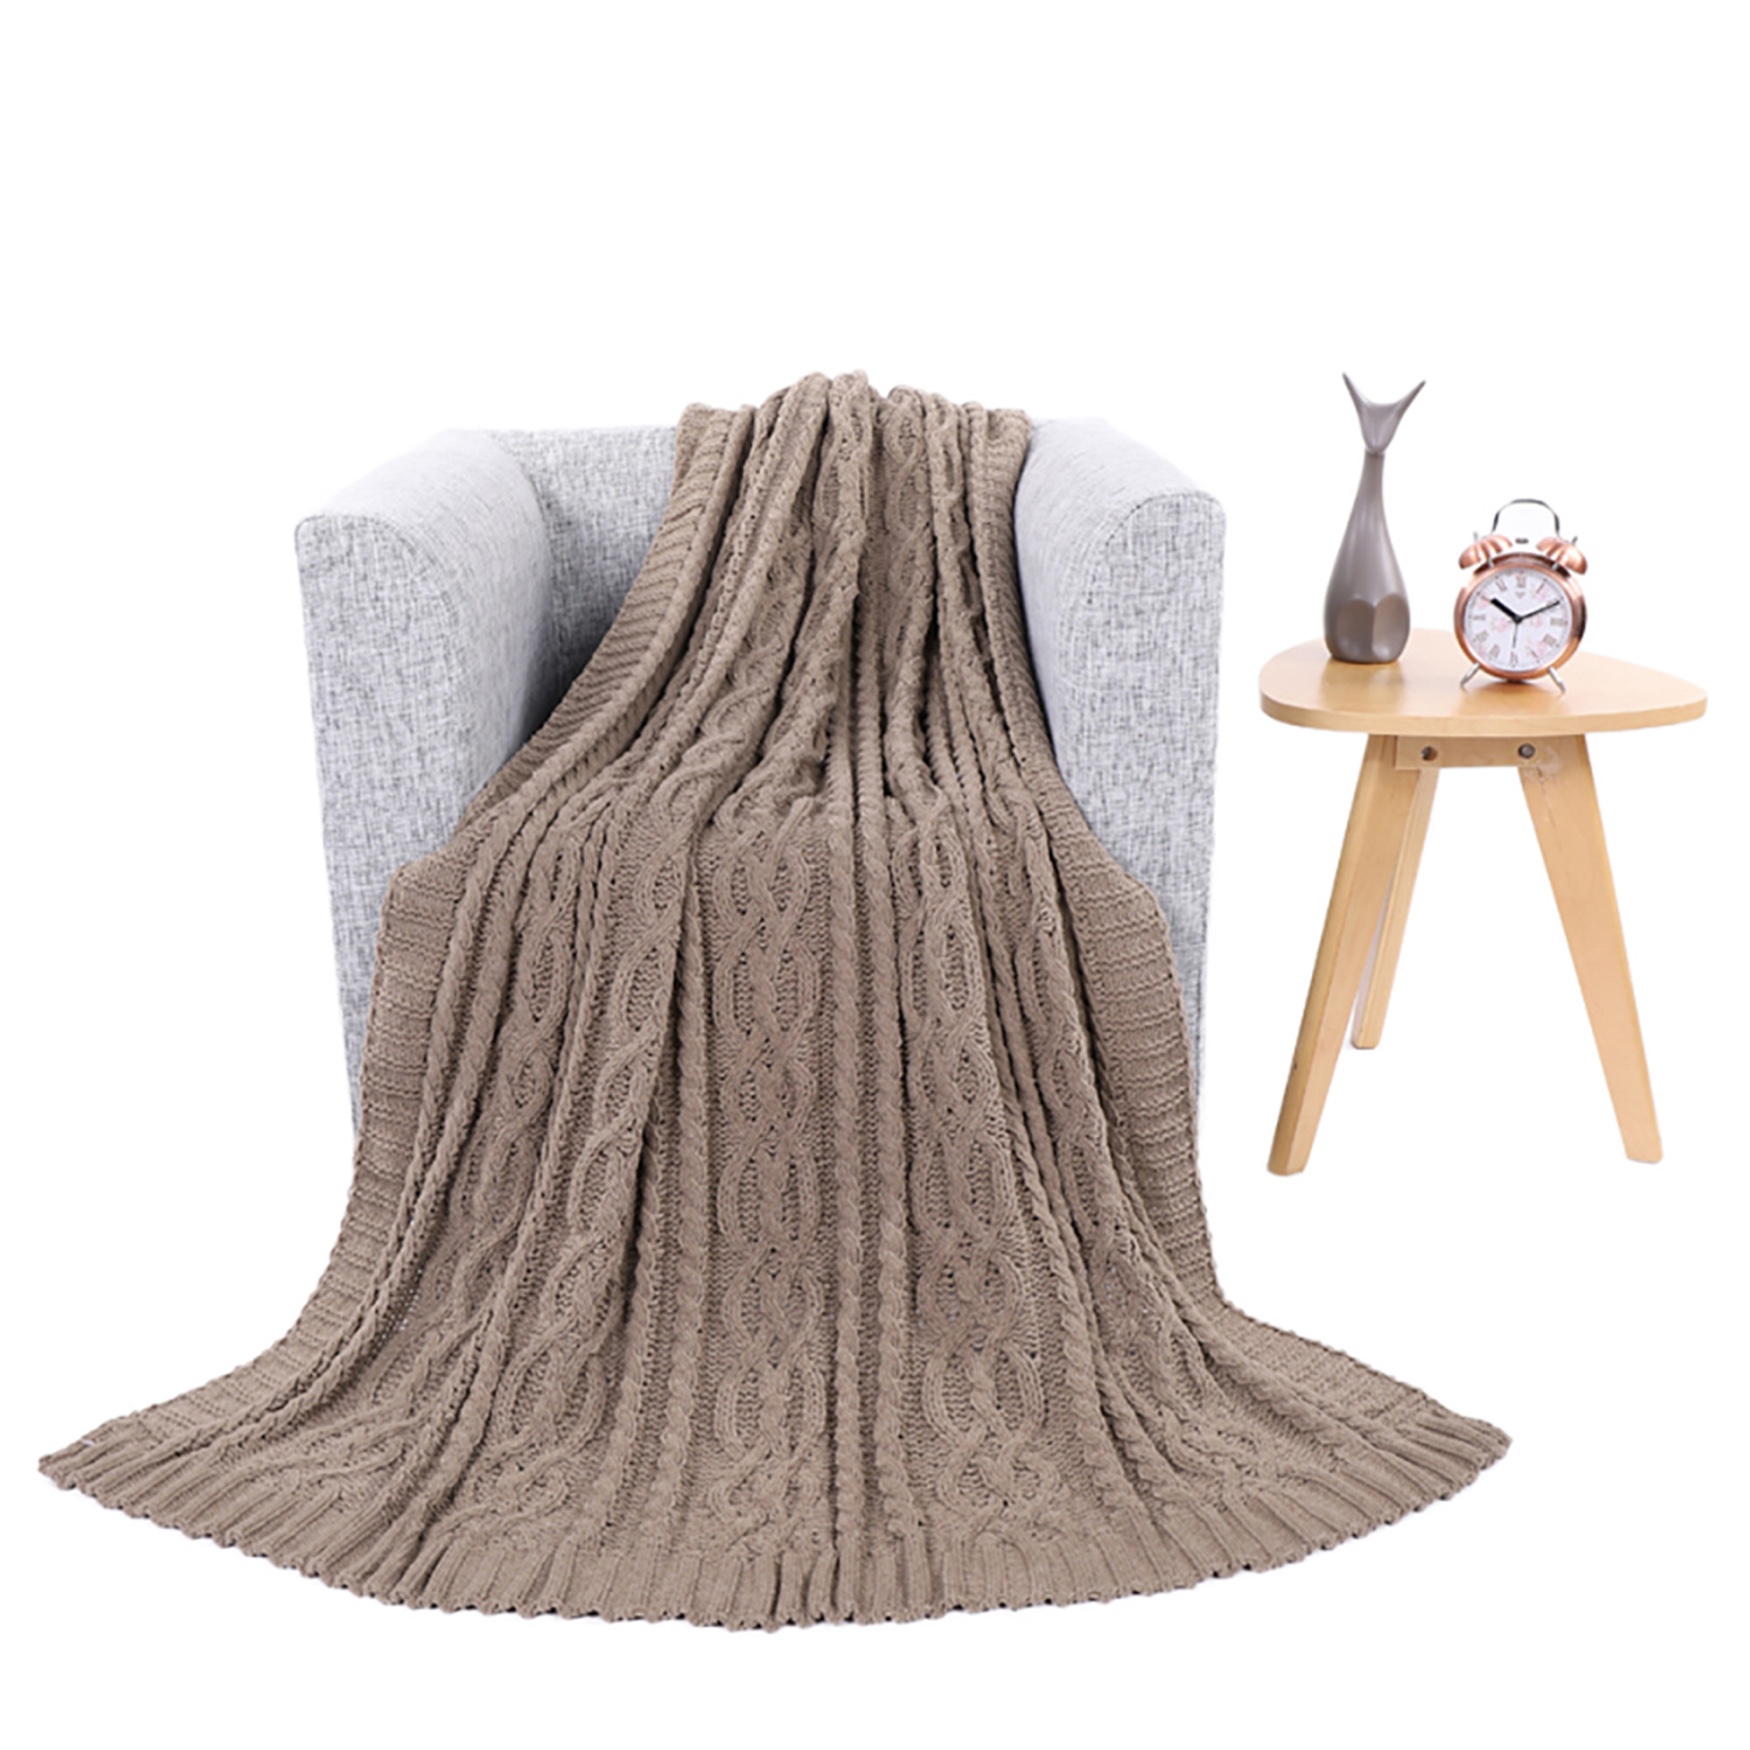 Battilo Home Knitted Chenille Throw Blanket for Sofa and Couch, Lightweight, Soft & Cozy Knit Throws, 51&quot; x 67&quot;, CAMEL